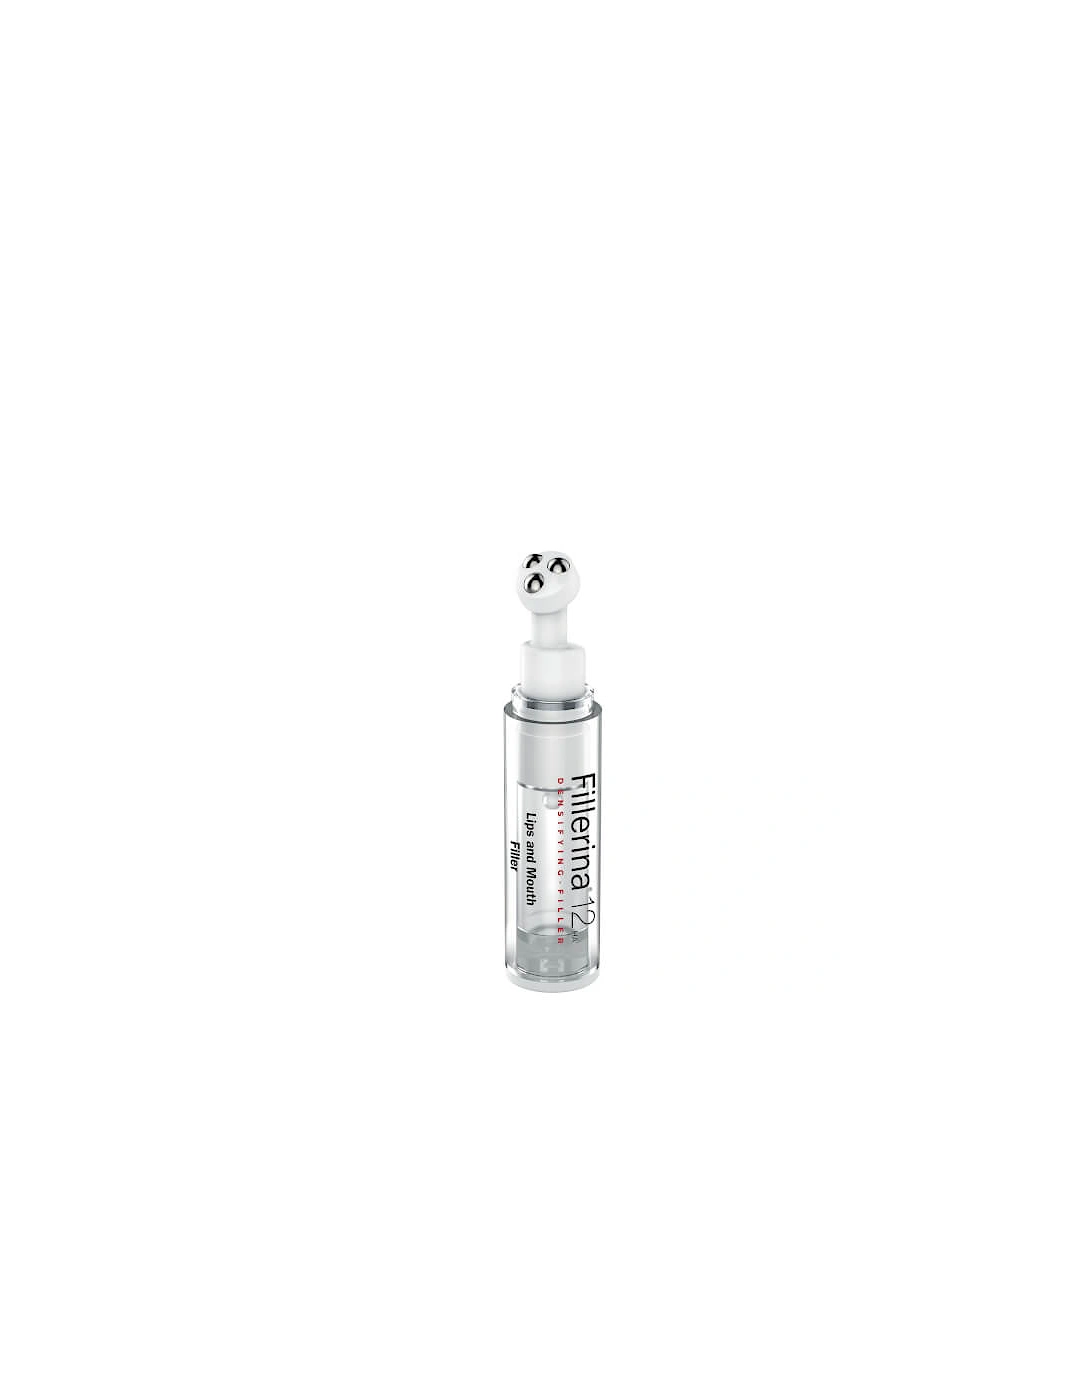 12 Densifying-Filler - Lips and Mouth - Grade 4 15ml, 2 of 1